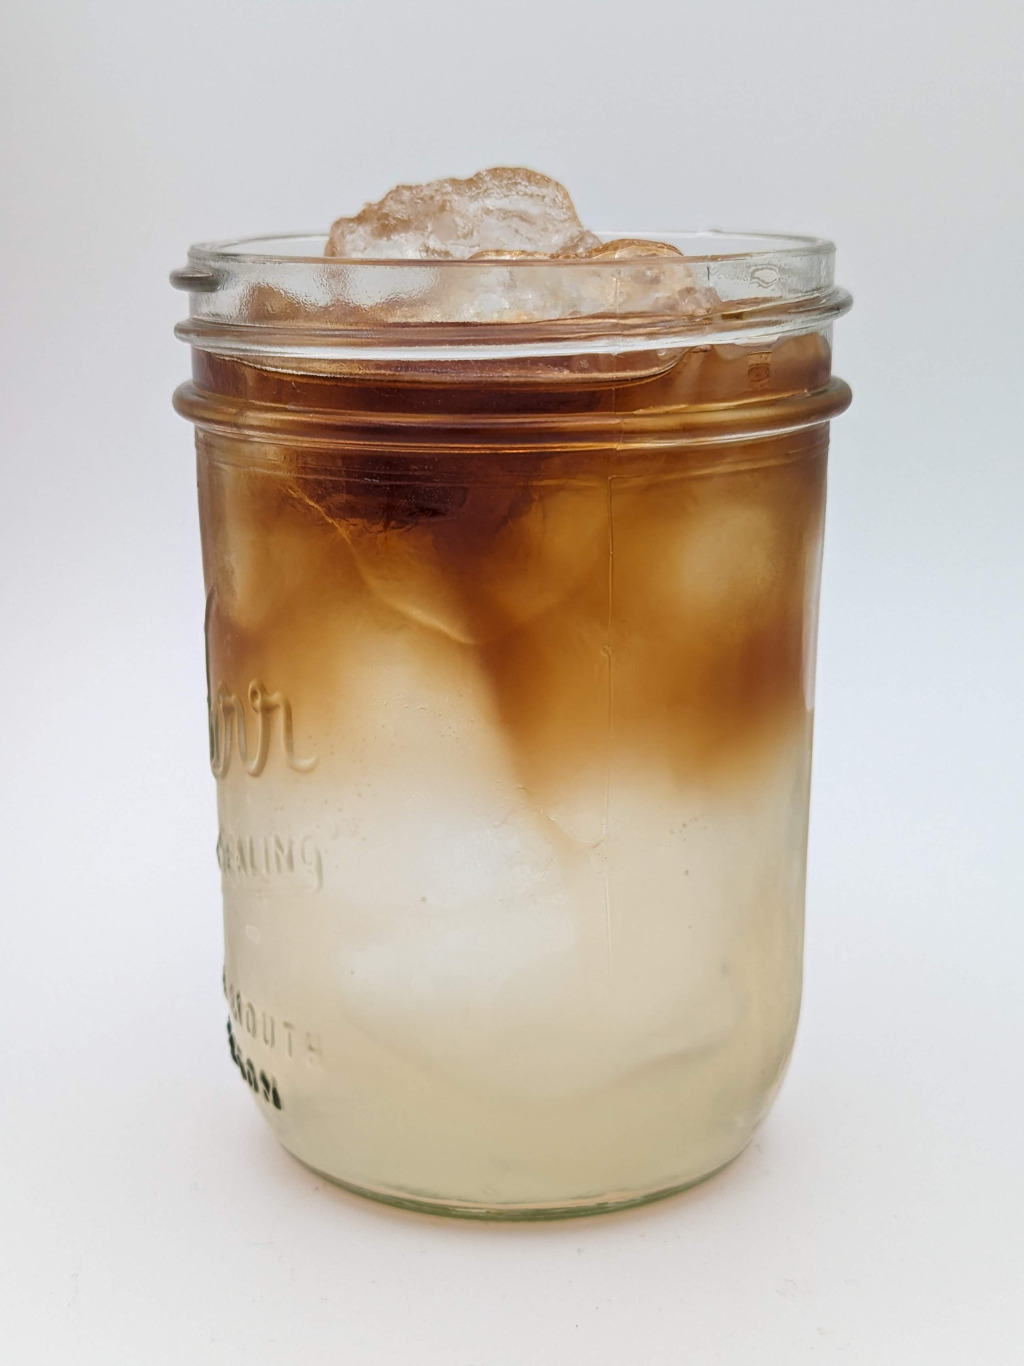 light cream colored liquid with a dark brown rum float in a glass jar